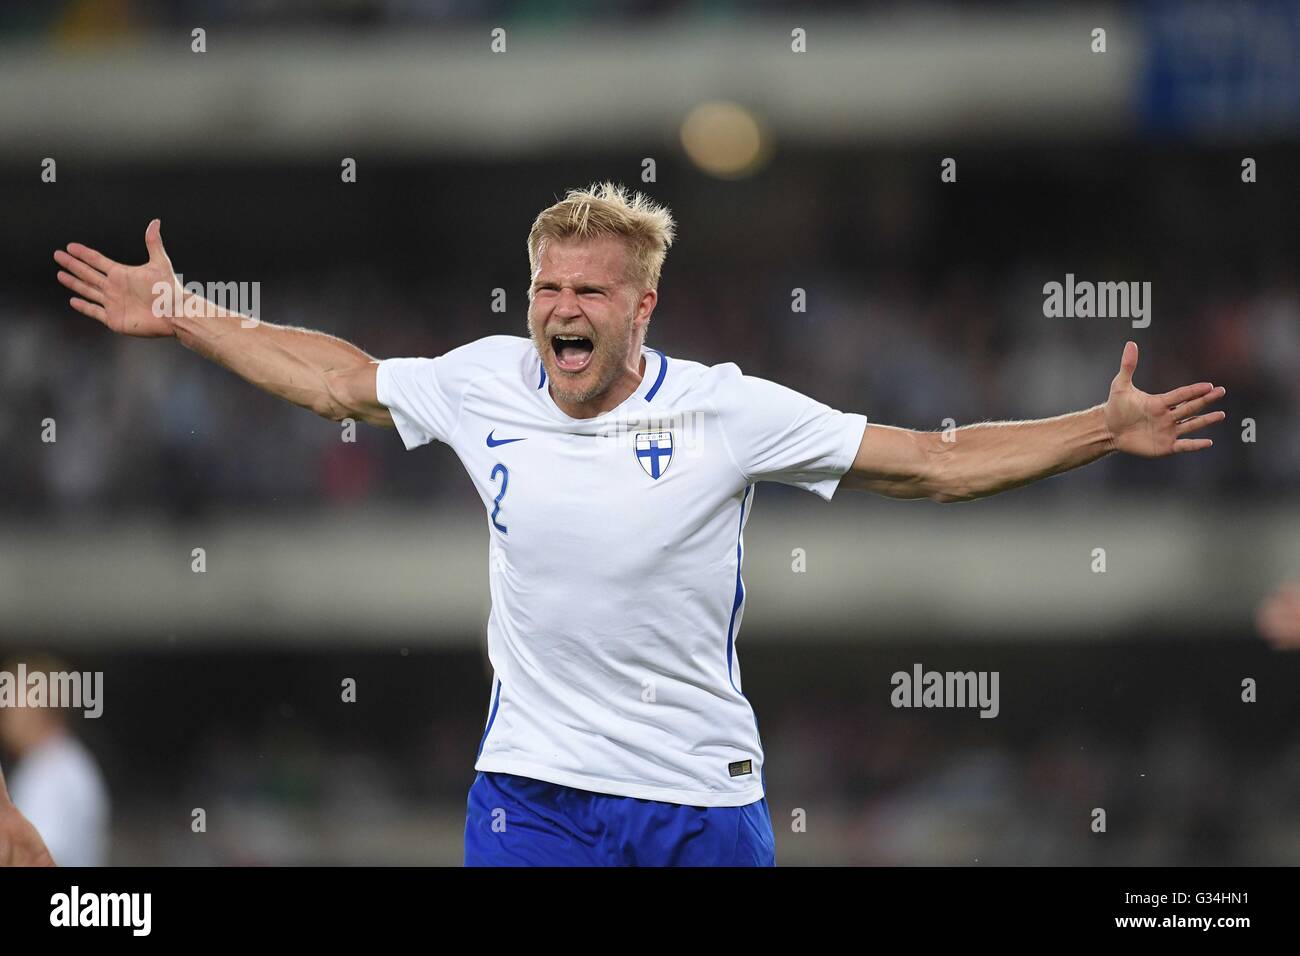 Verona, Italy. 6th June, 2016. International friendly match between Italy and Finland national teams played in Stadio Marc`Antonio Bentegodi, Verona Italy. The match, which Italy won with a 2-0 score, was part of their preparation for the Euro 2016. Antonio Candreva (27’ penalty kick) and Daniele de Rossi (71’) scored the goals Stock Photo